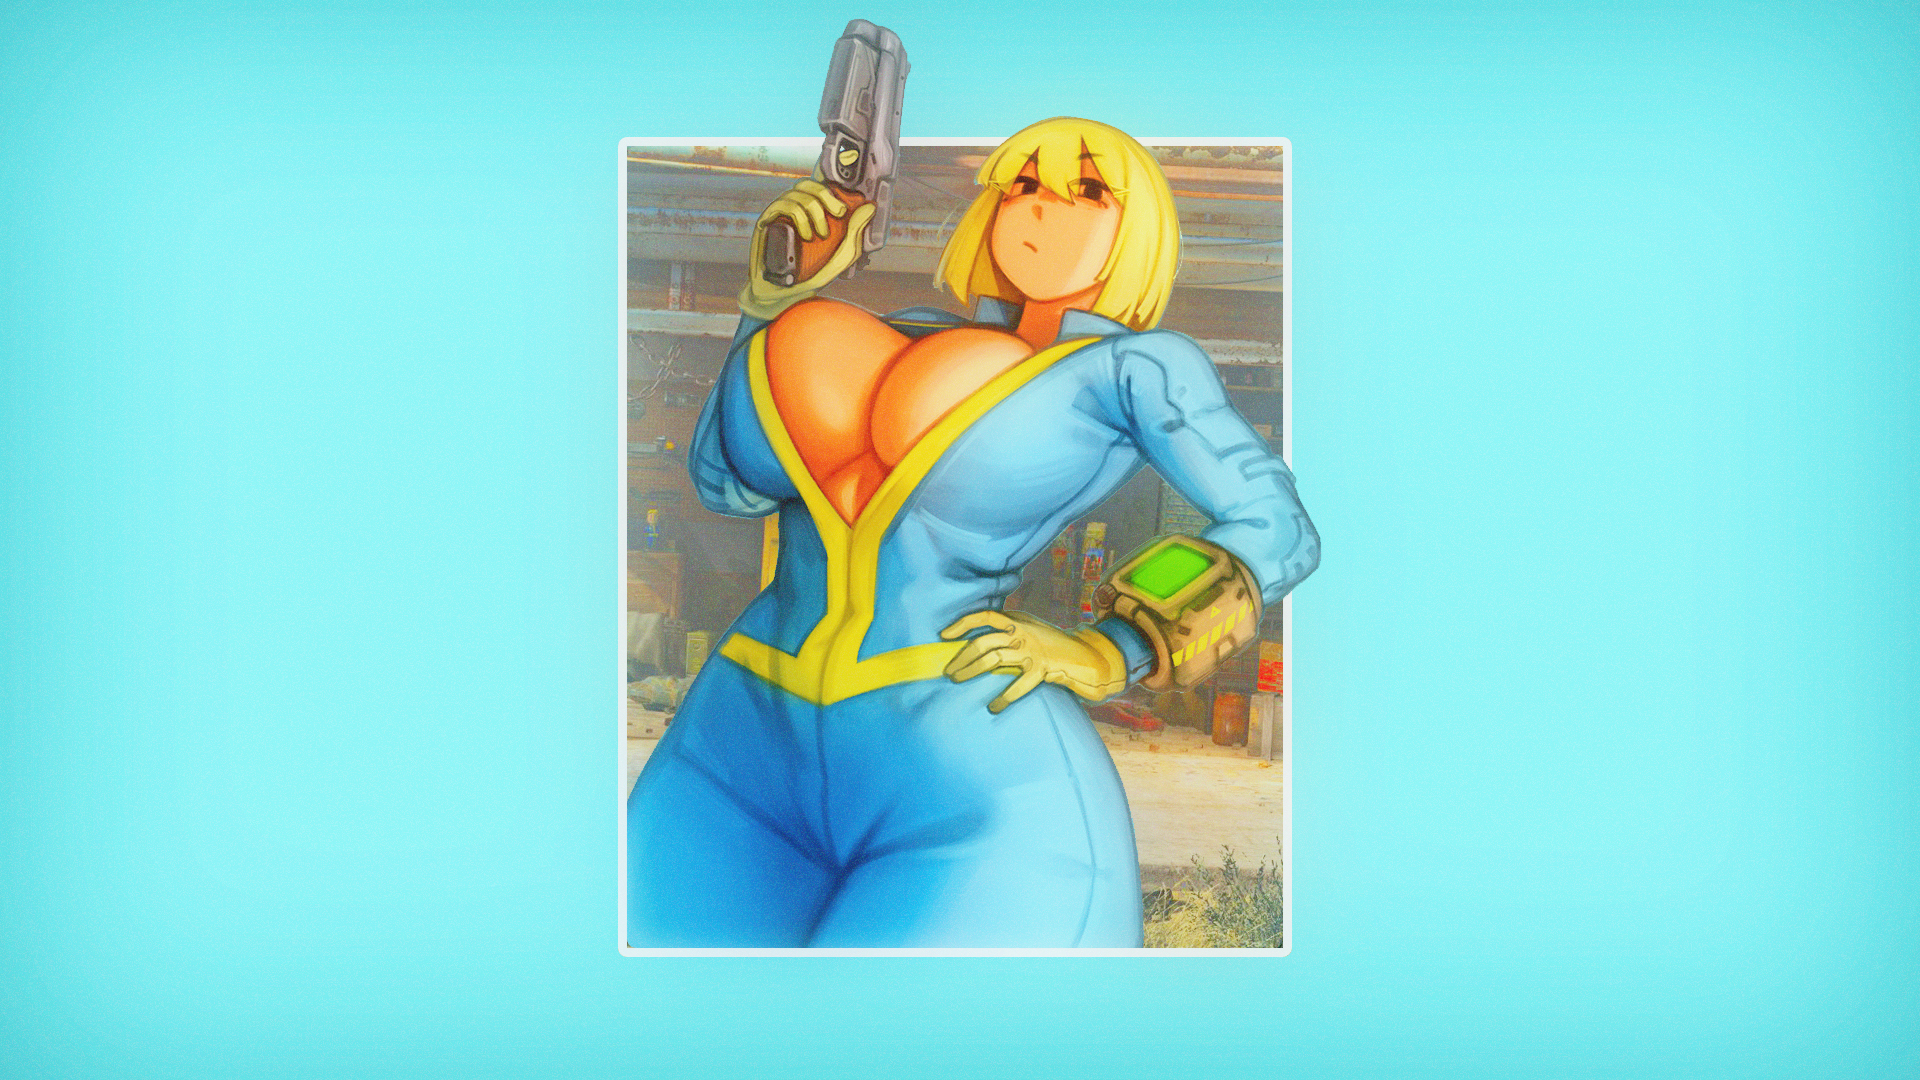 Anime 1920x1080 anime anime girls simple background picture-in-picture Fallout 4 vault girl cleavage open shirt big boobs gun girls with guns blonde